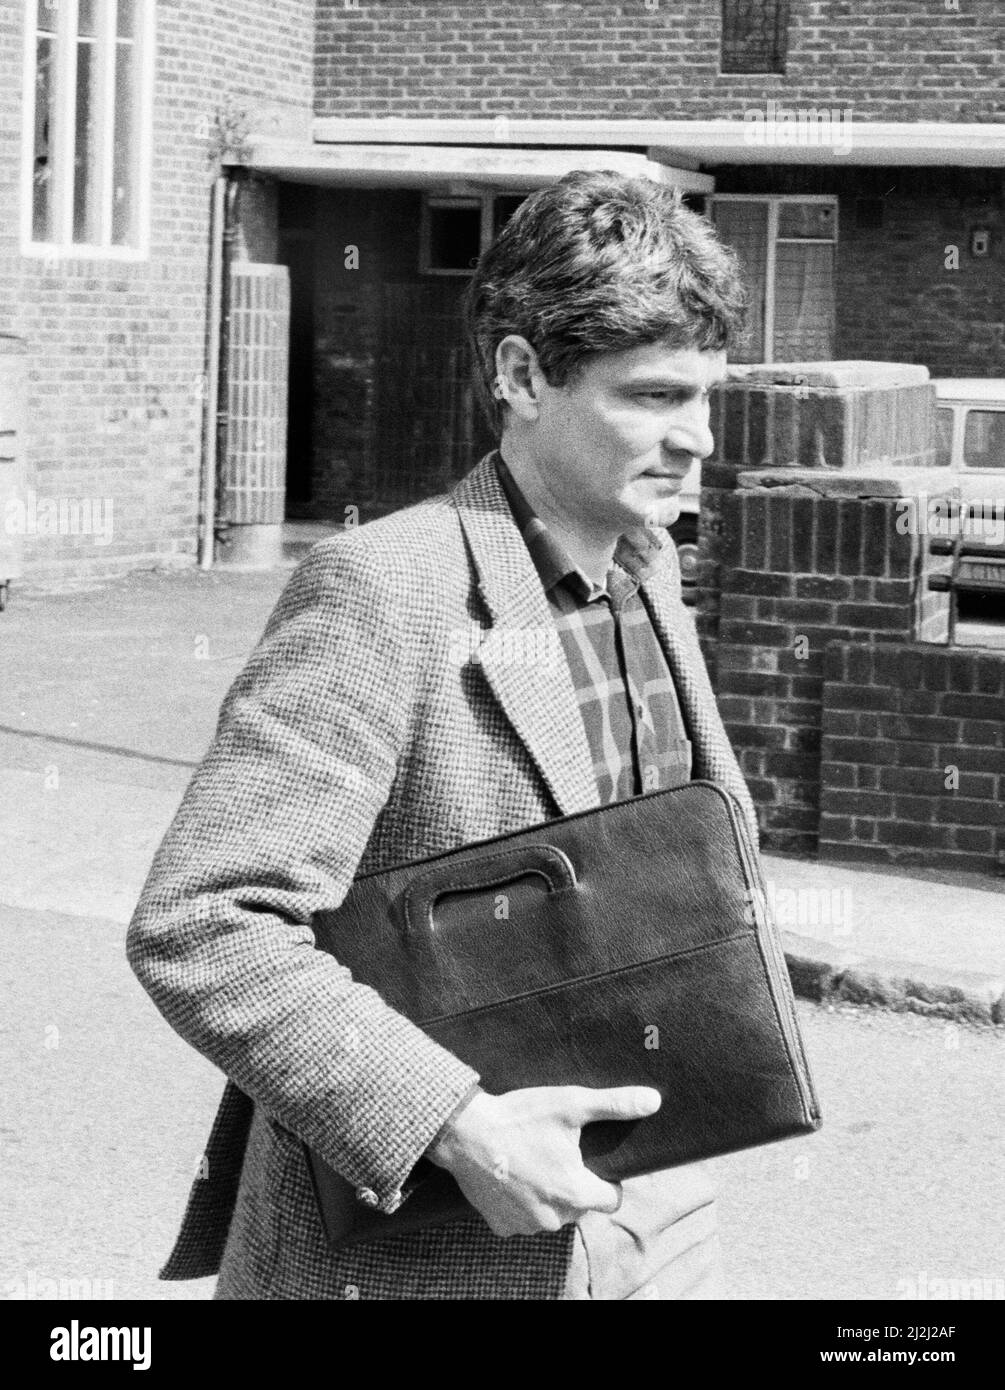 Inquest in to the murder of private investigator Daniel Morgan,  killed in Sydenham, south east London in March 1987. He was thought to be close to exposing police corruption. Pictured is the victim's brother Alistair, who accused Daniel's  private eye partner John Rees of involvemnet in the brutal axe murder, arriving at Southwark Coroners Court. 11th April 1988. Stock Photo